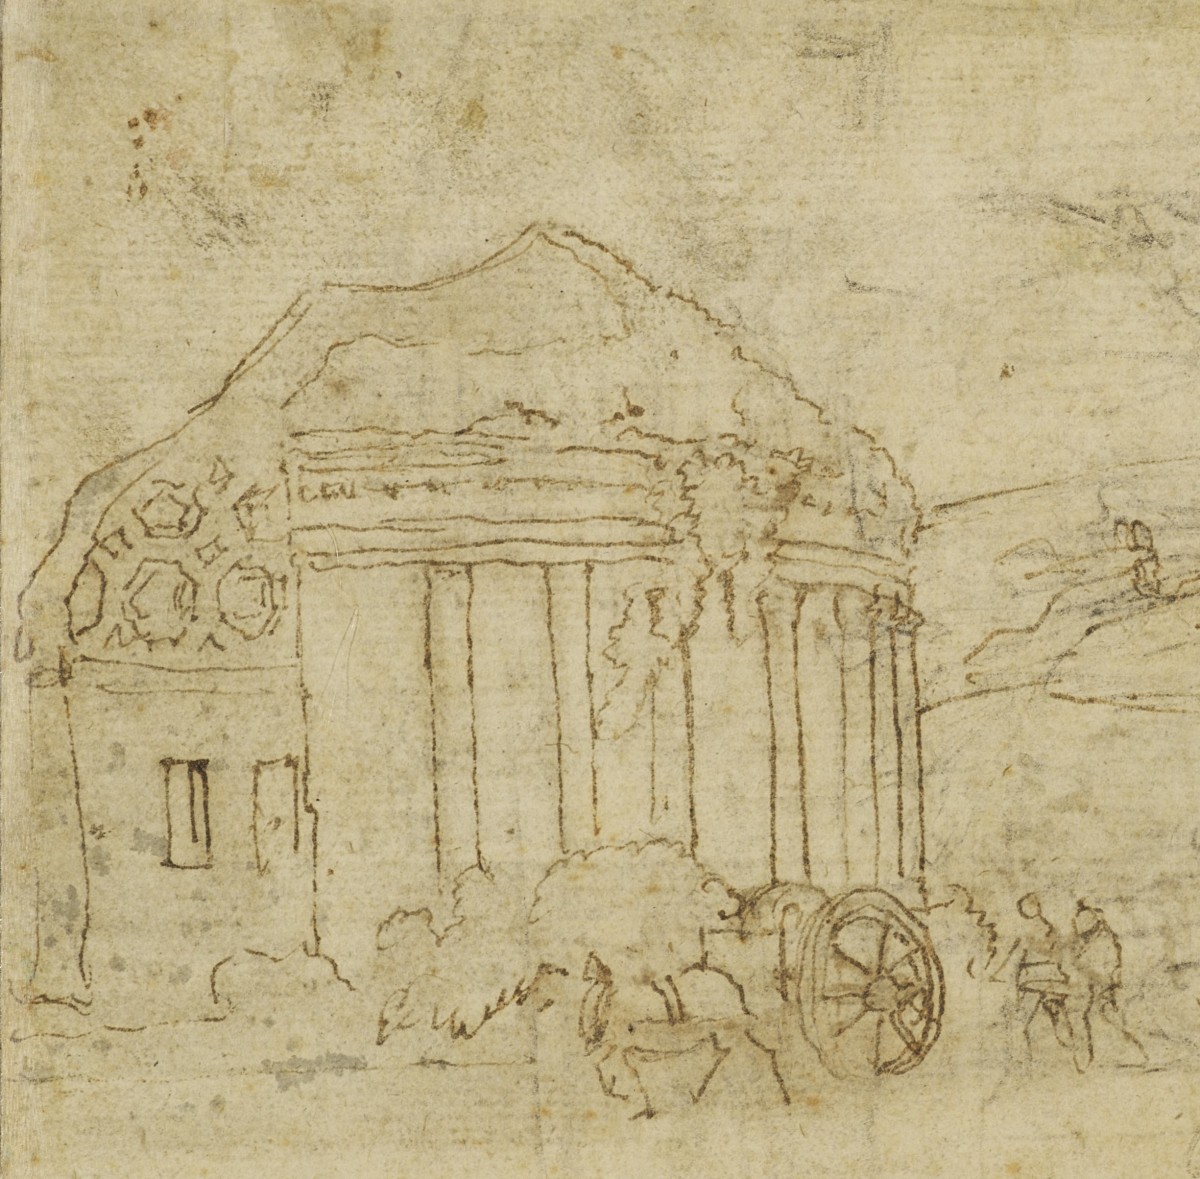 Preparatory drawing during the Italian renaissance an introduction